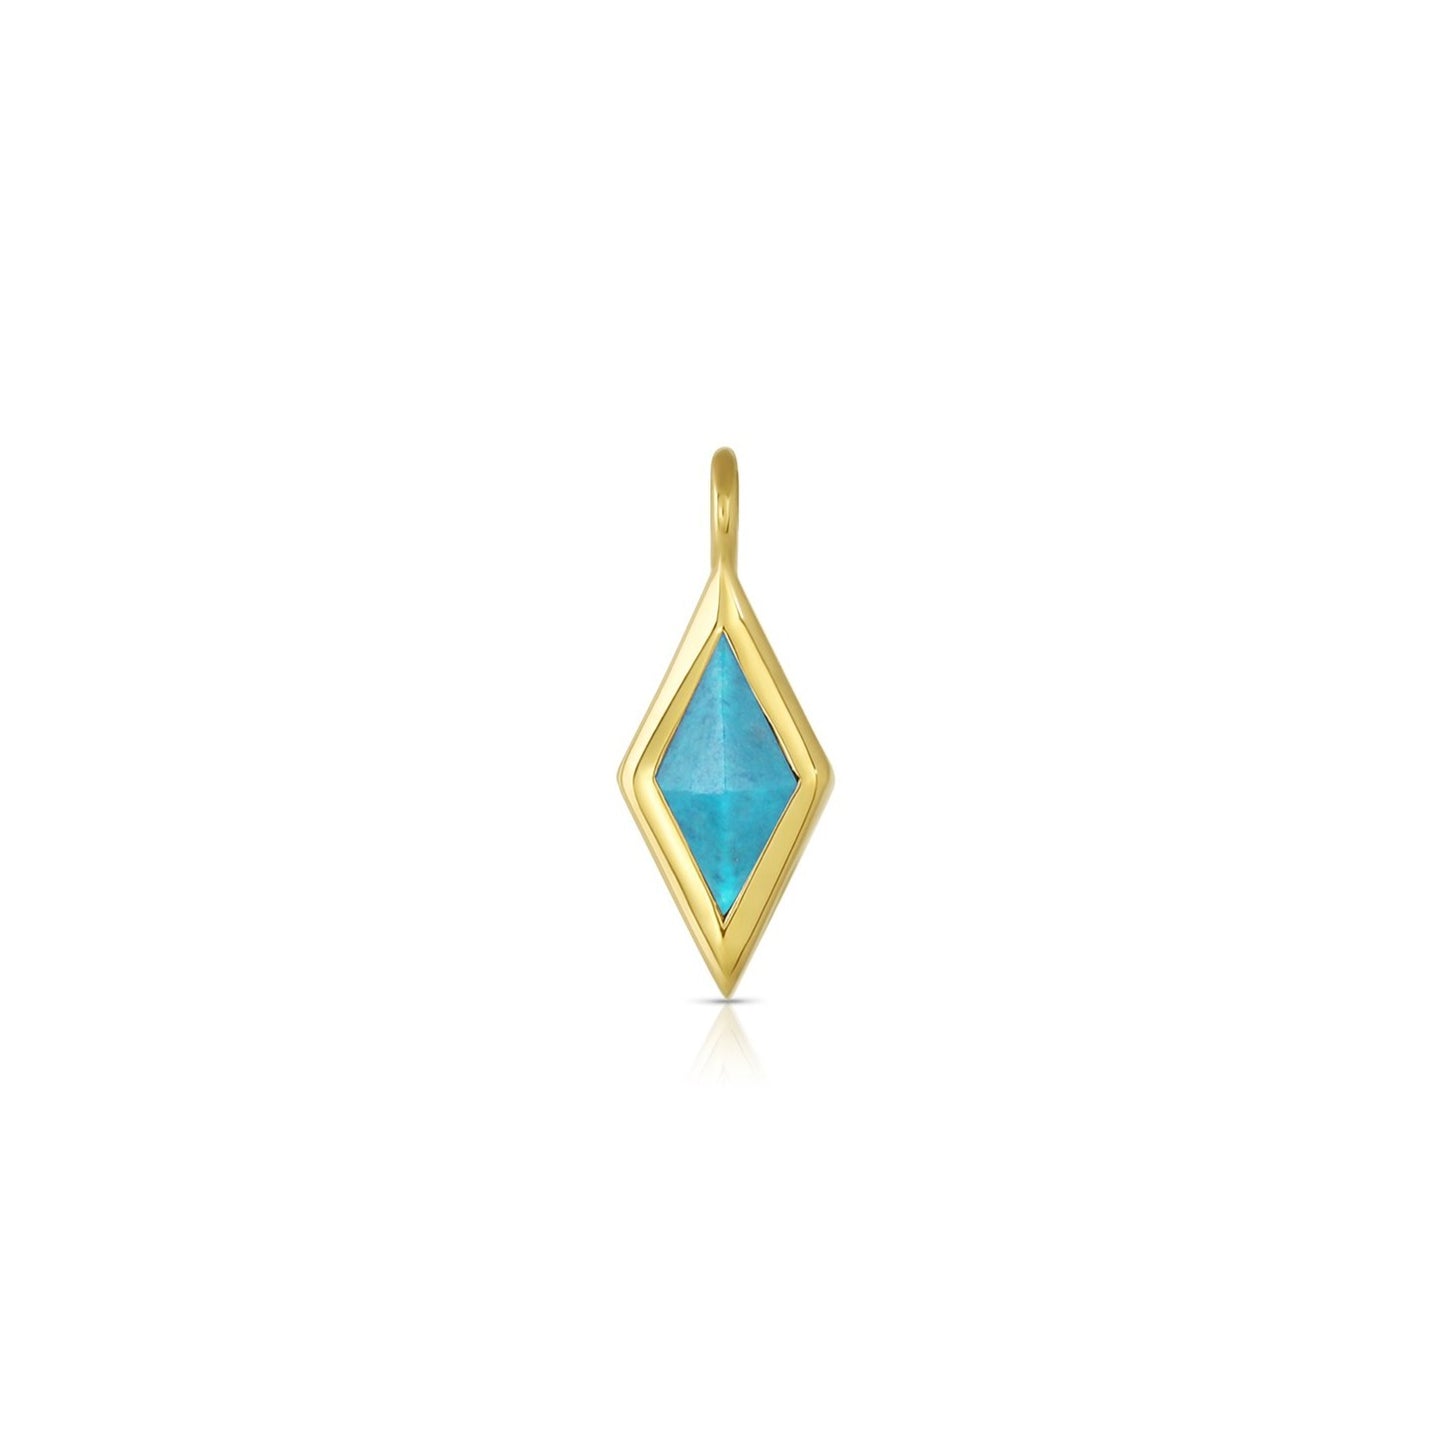 Load image into Gallery viewer, turquoise rhombus shaped pendant set in 18k yellow gold on white background.
